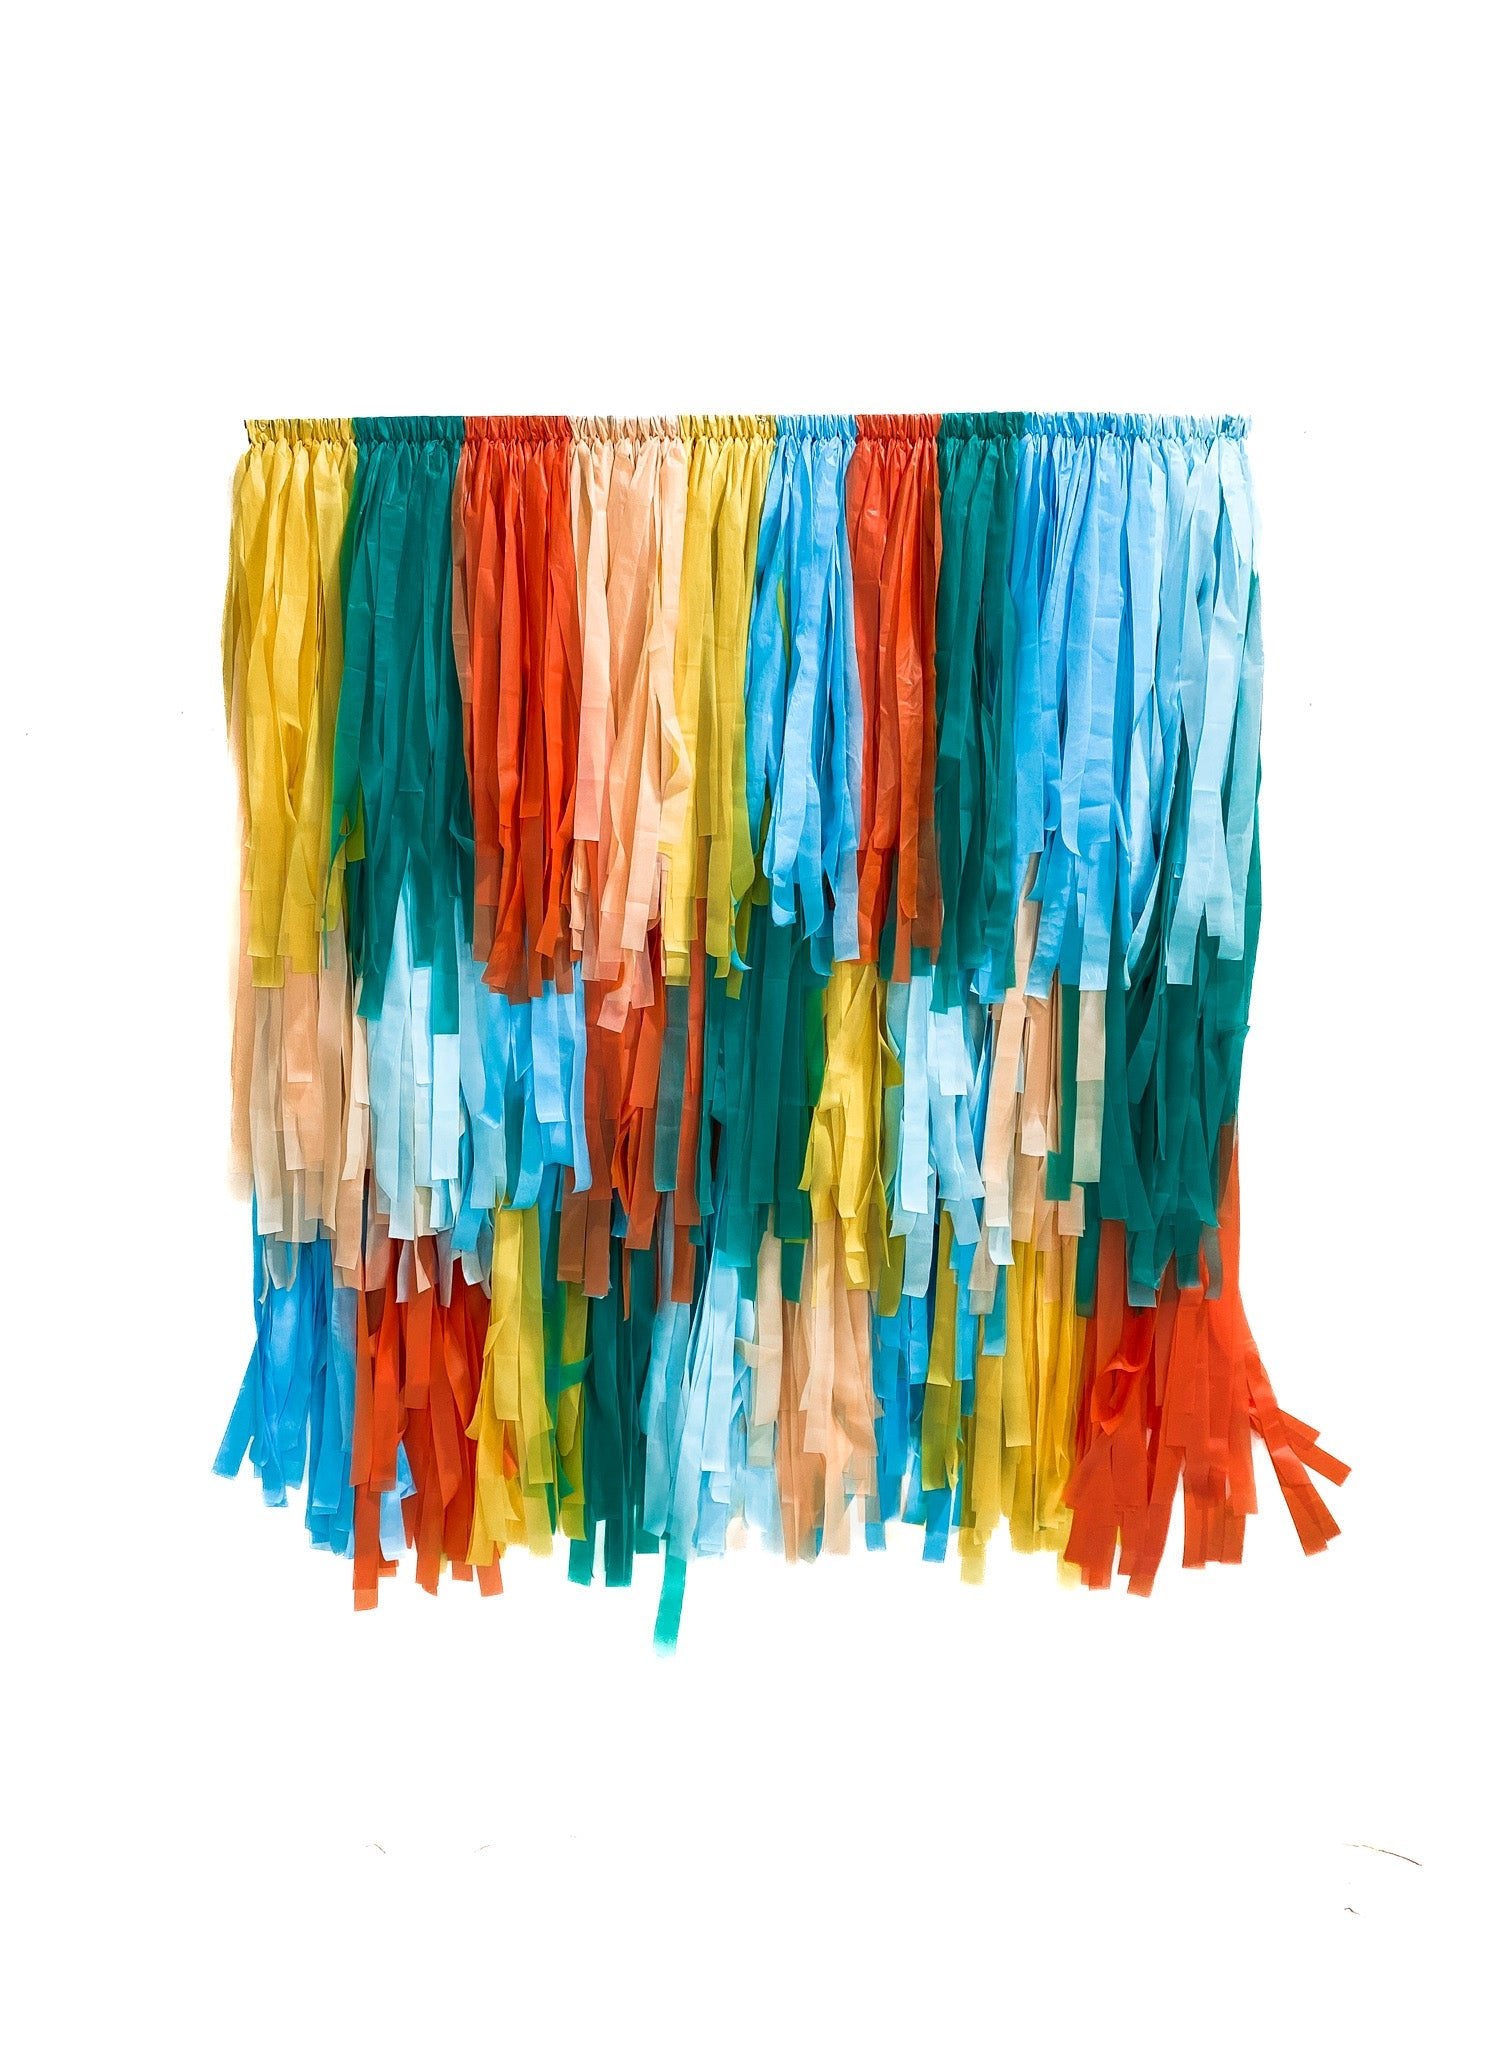 Surfs Up Backdrop - Oh My Darling Party Co-BLUE BACKDROPdefaultGREEN BACKDROP #Fringe_Backdrop#